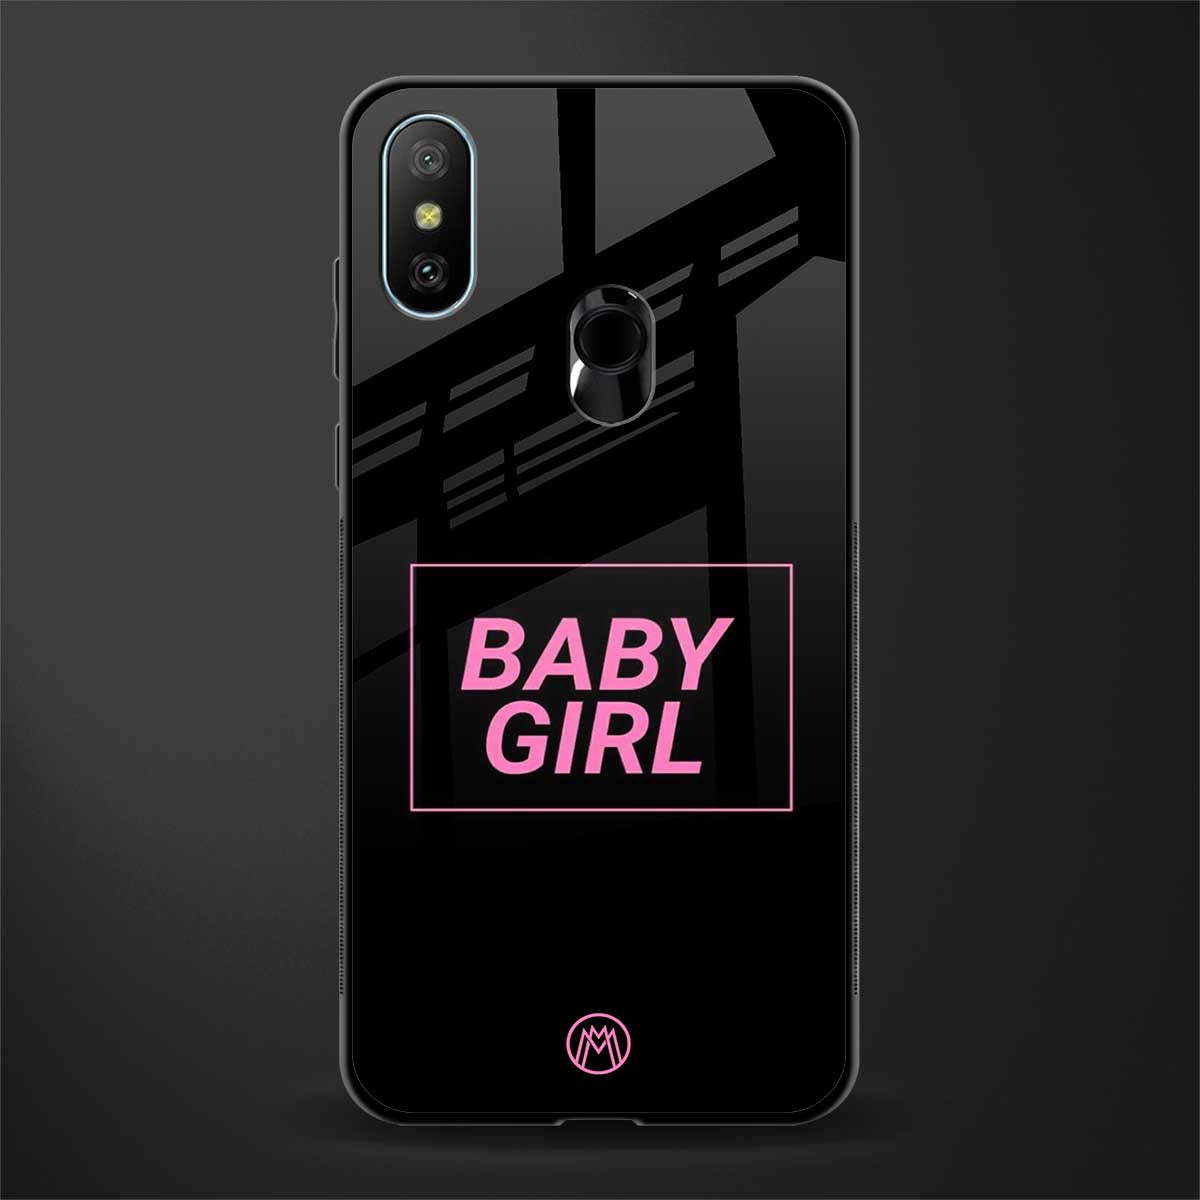 baby girl glass case for redmi 6 pro image